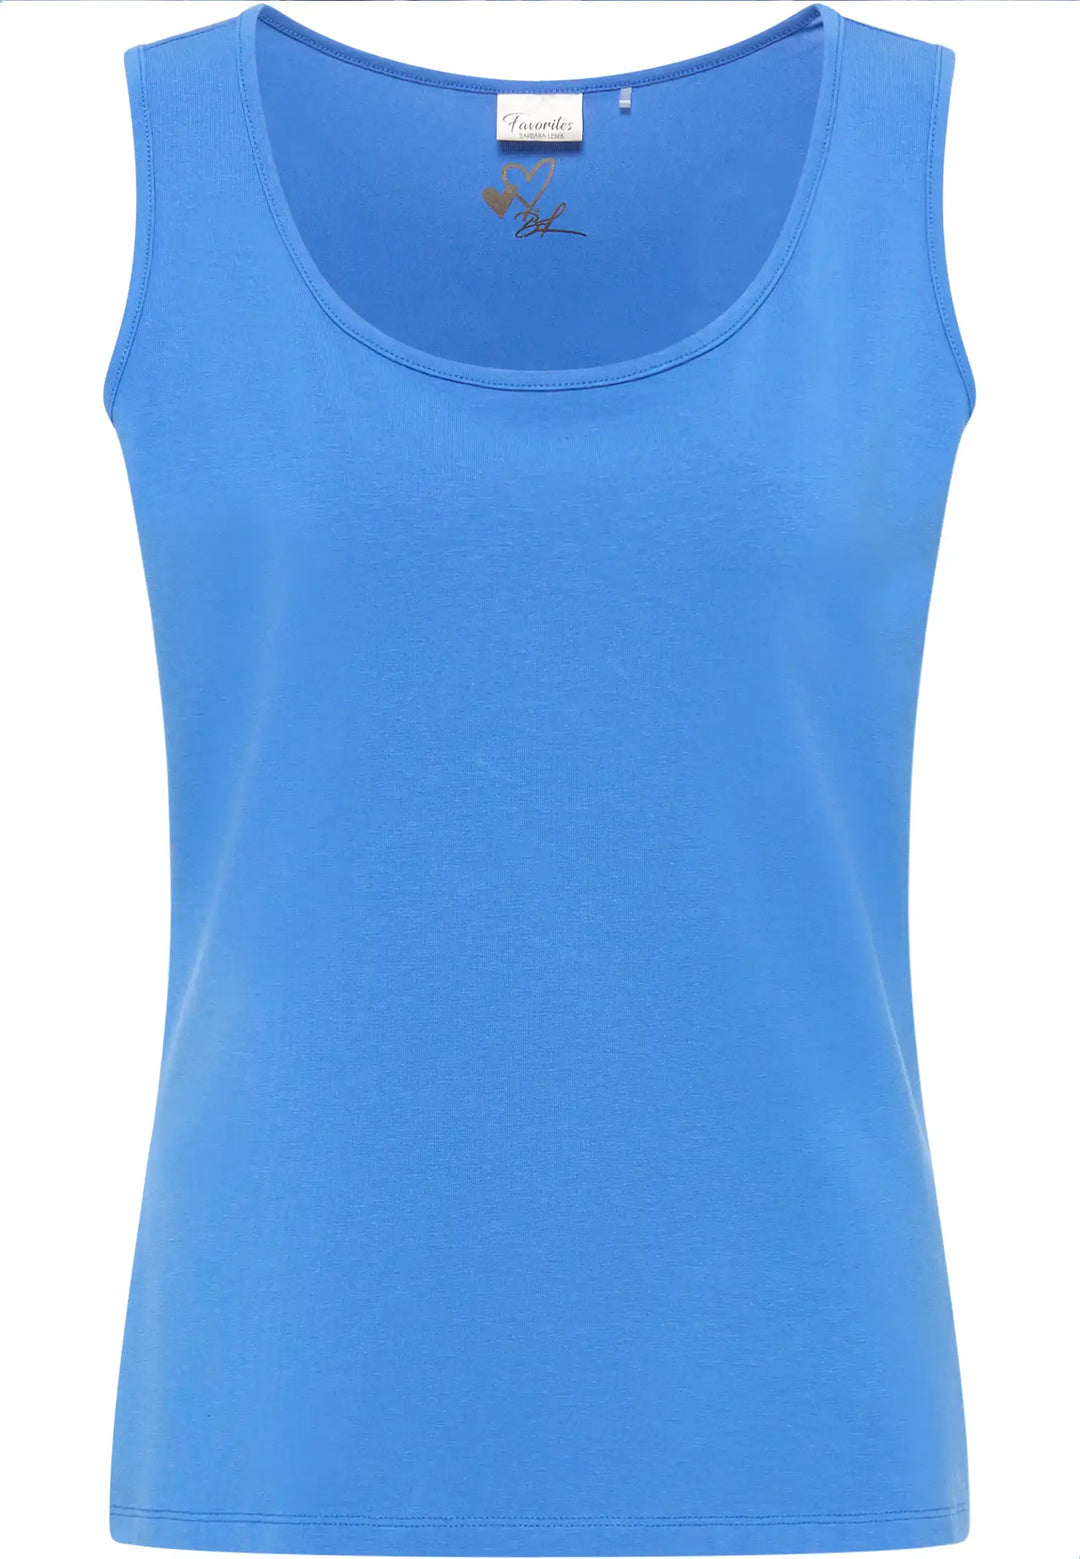 Sky blue sleeveless top with a relaxed scoop neck and straight fit, featuring a discreet heart-shaped logo printed on the inside back beneath the label for an understated personal touch, style 55120042-730.